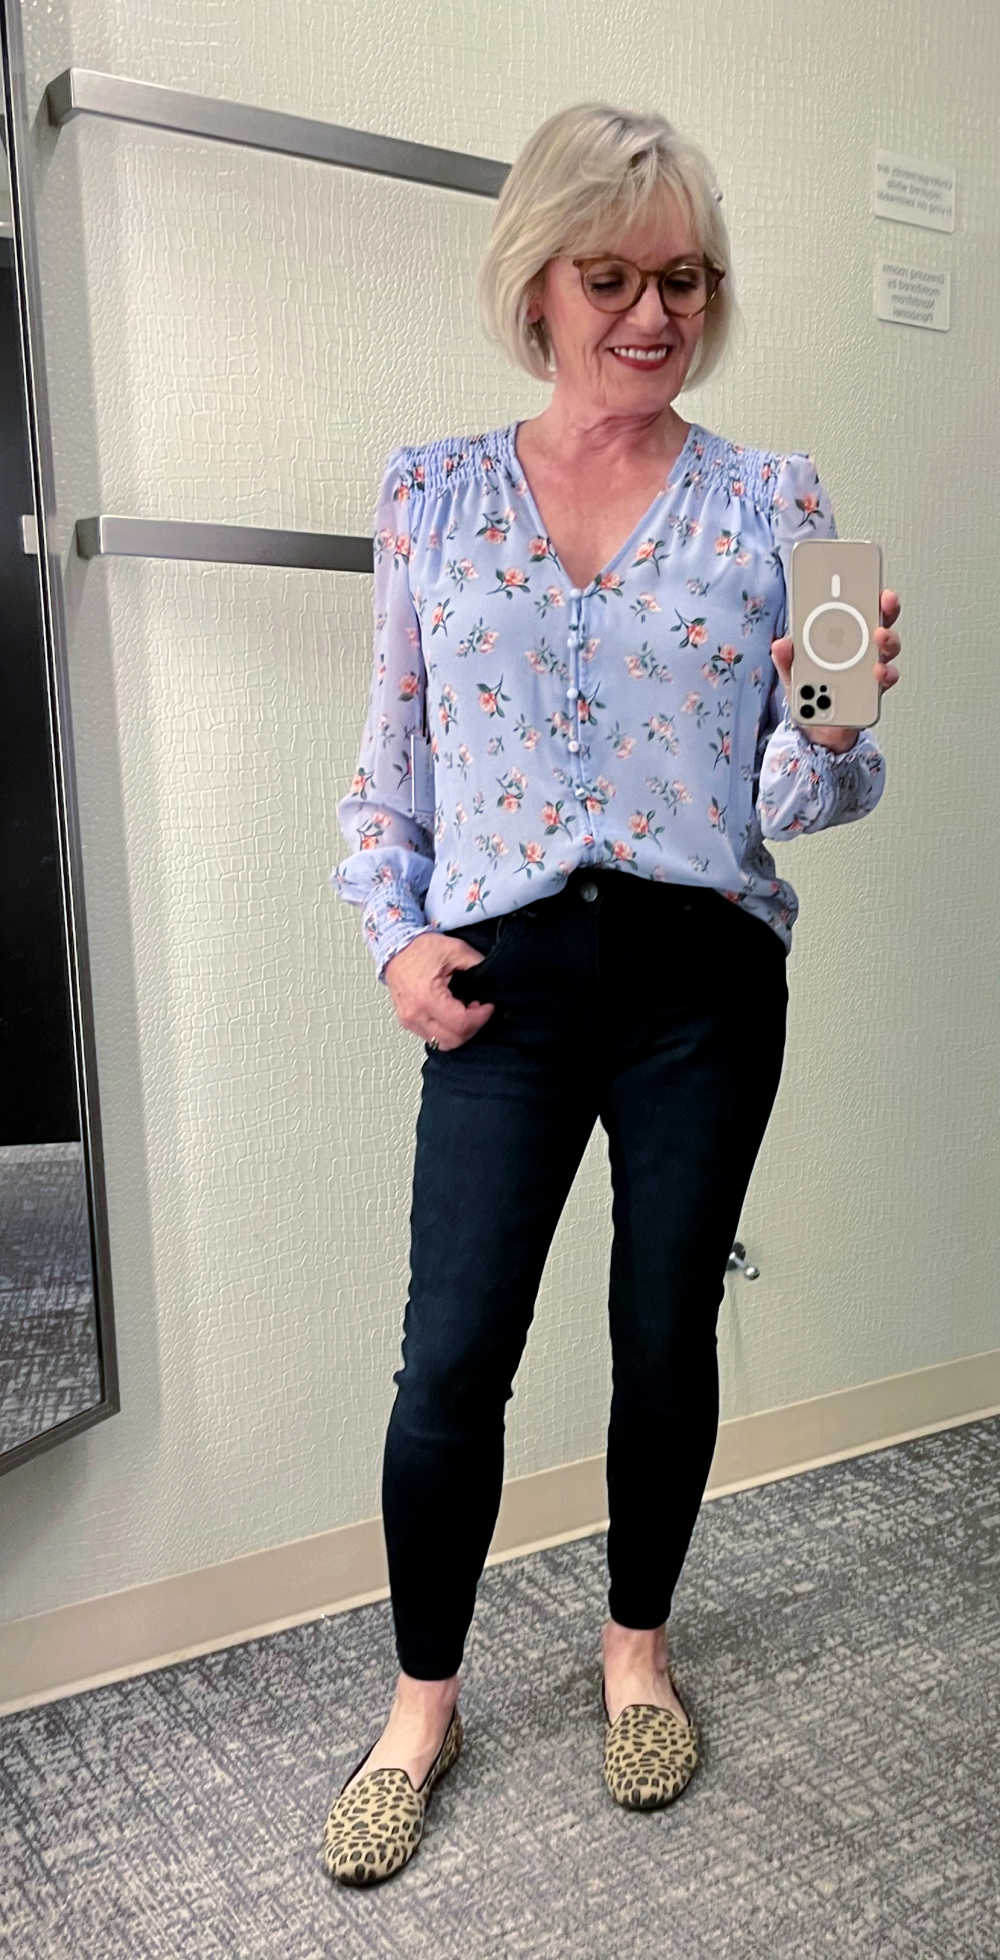 woman taking selfie wearing floral blouse and skinny jeans